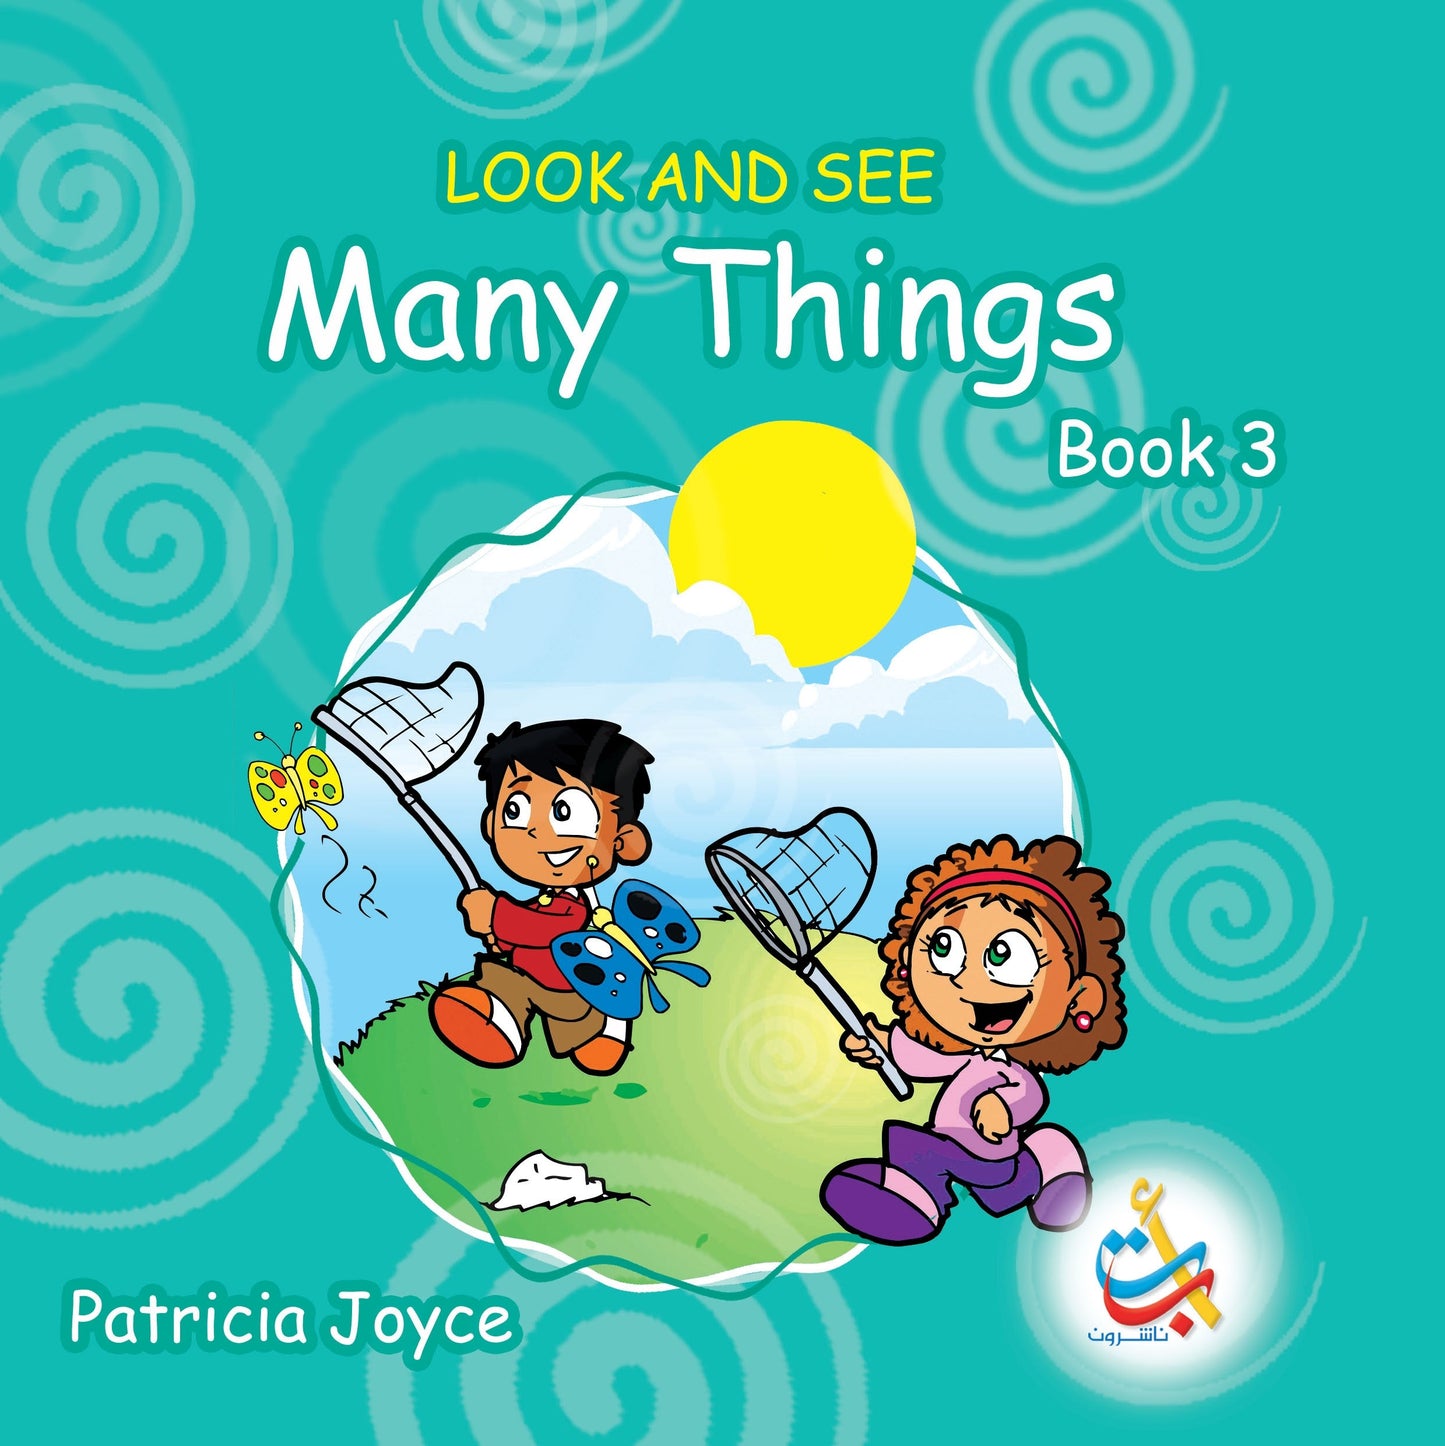 Many things Book 3 - Look and See - Hard Cover